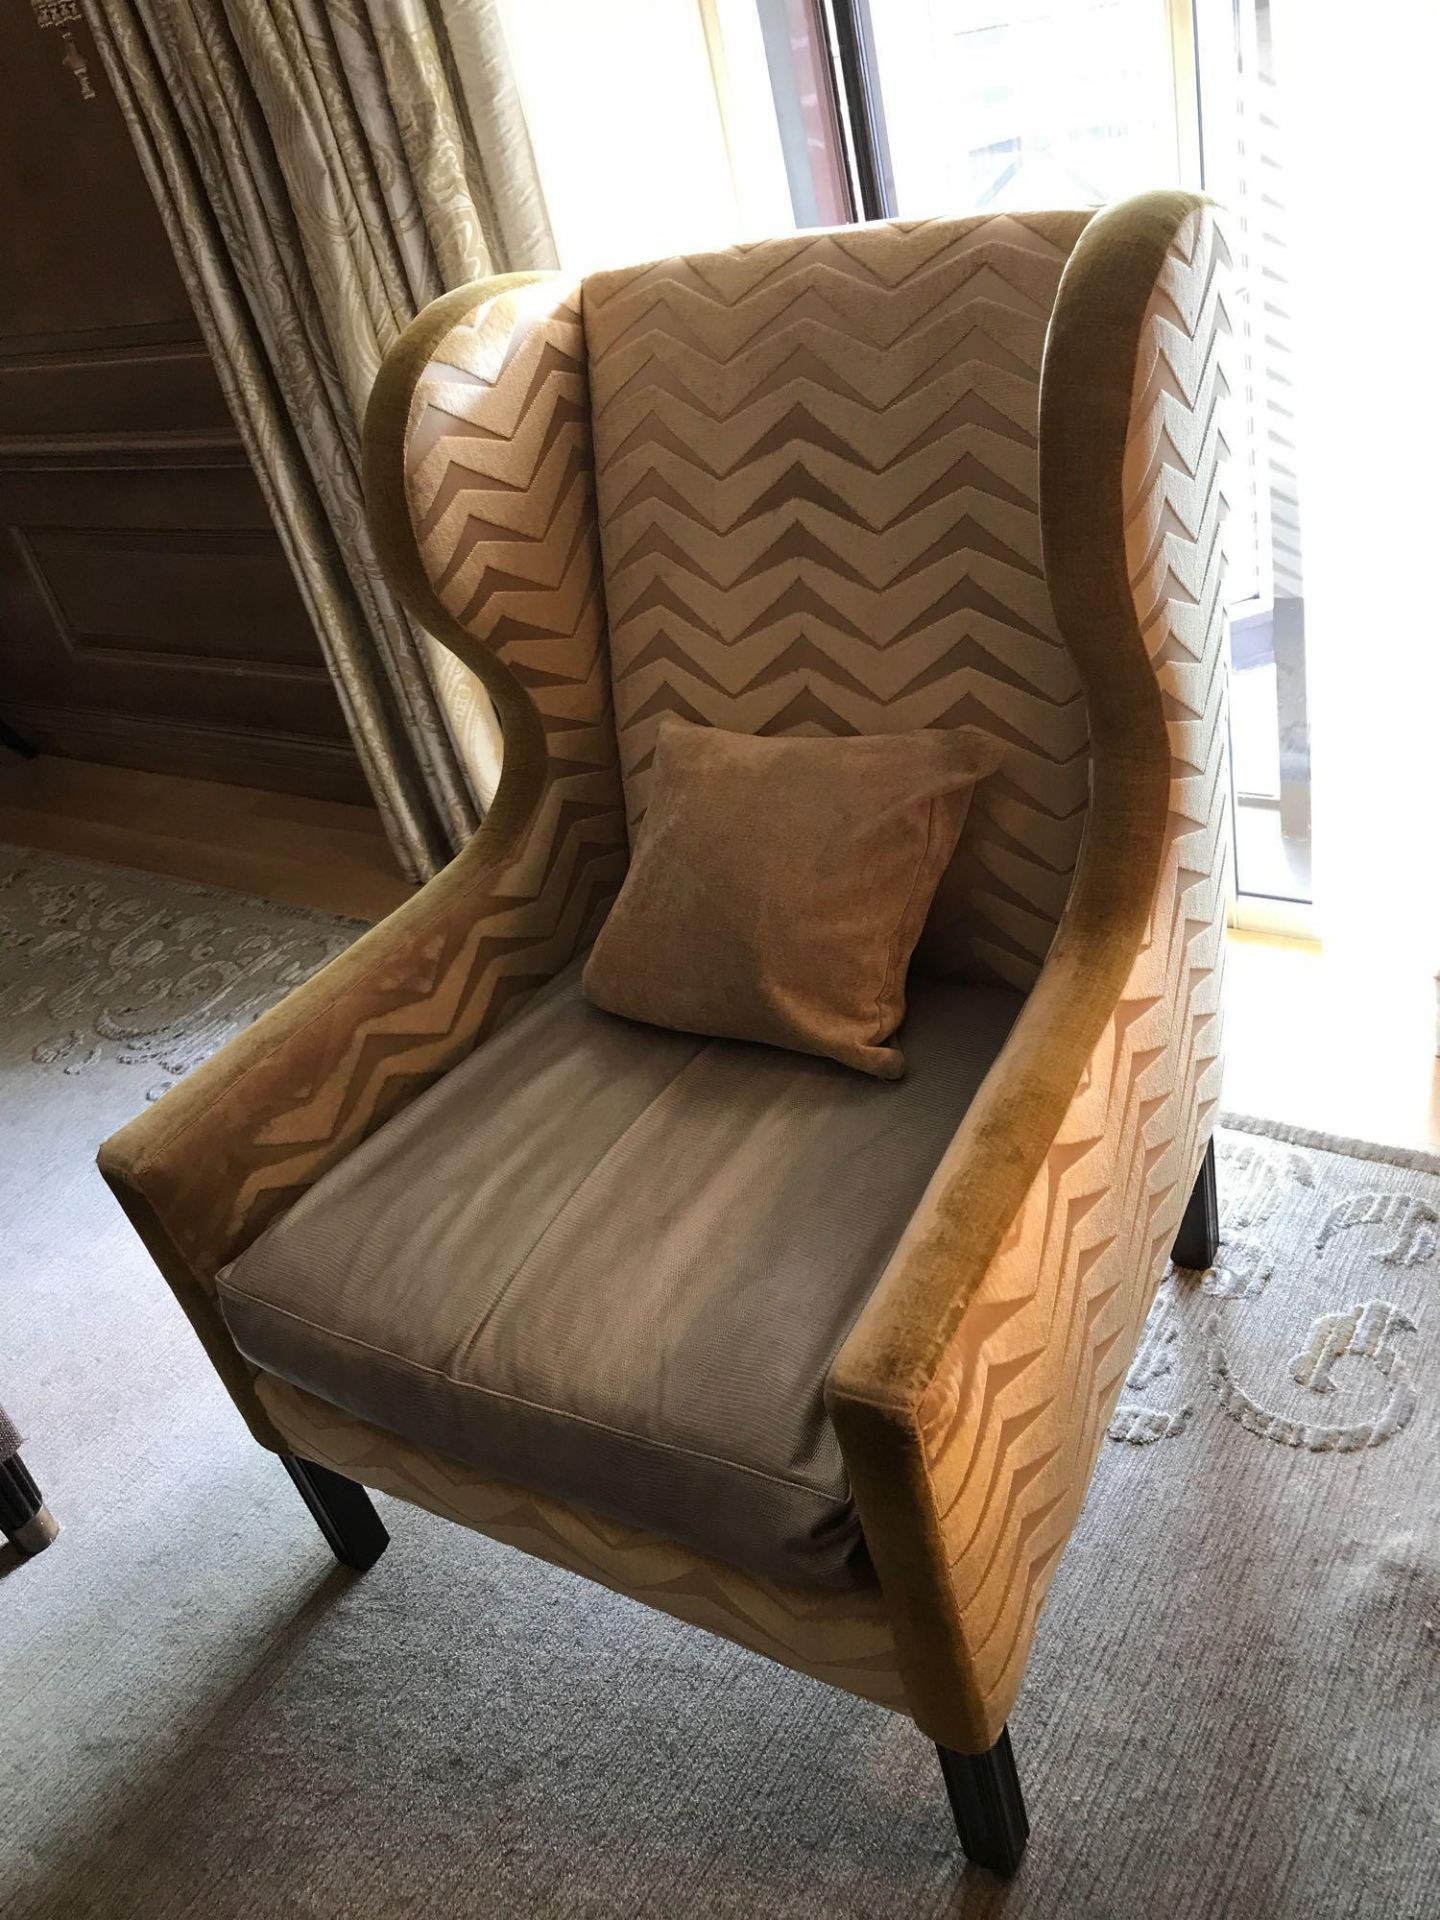 A Wingback Chair With Gold Chevron Fabric 78 x 62 x 106cm